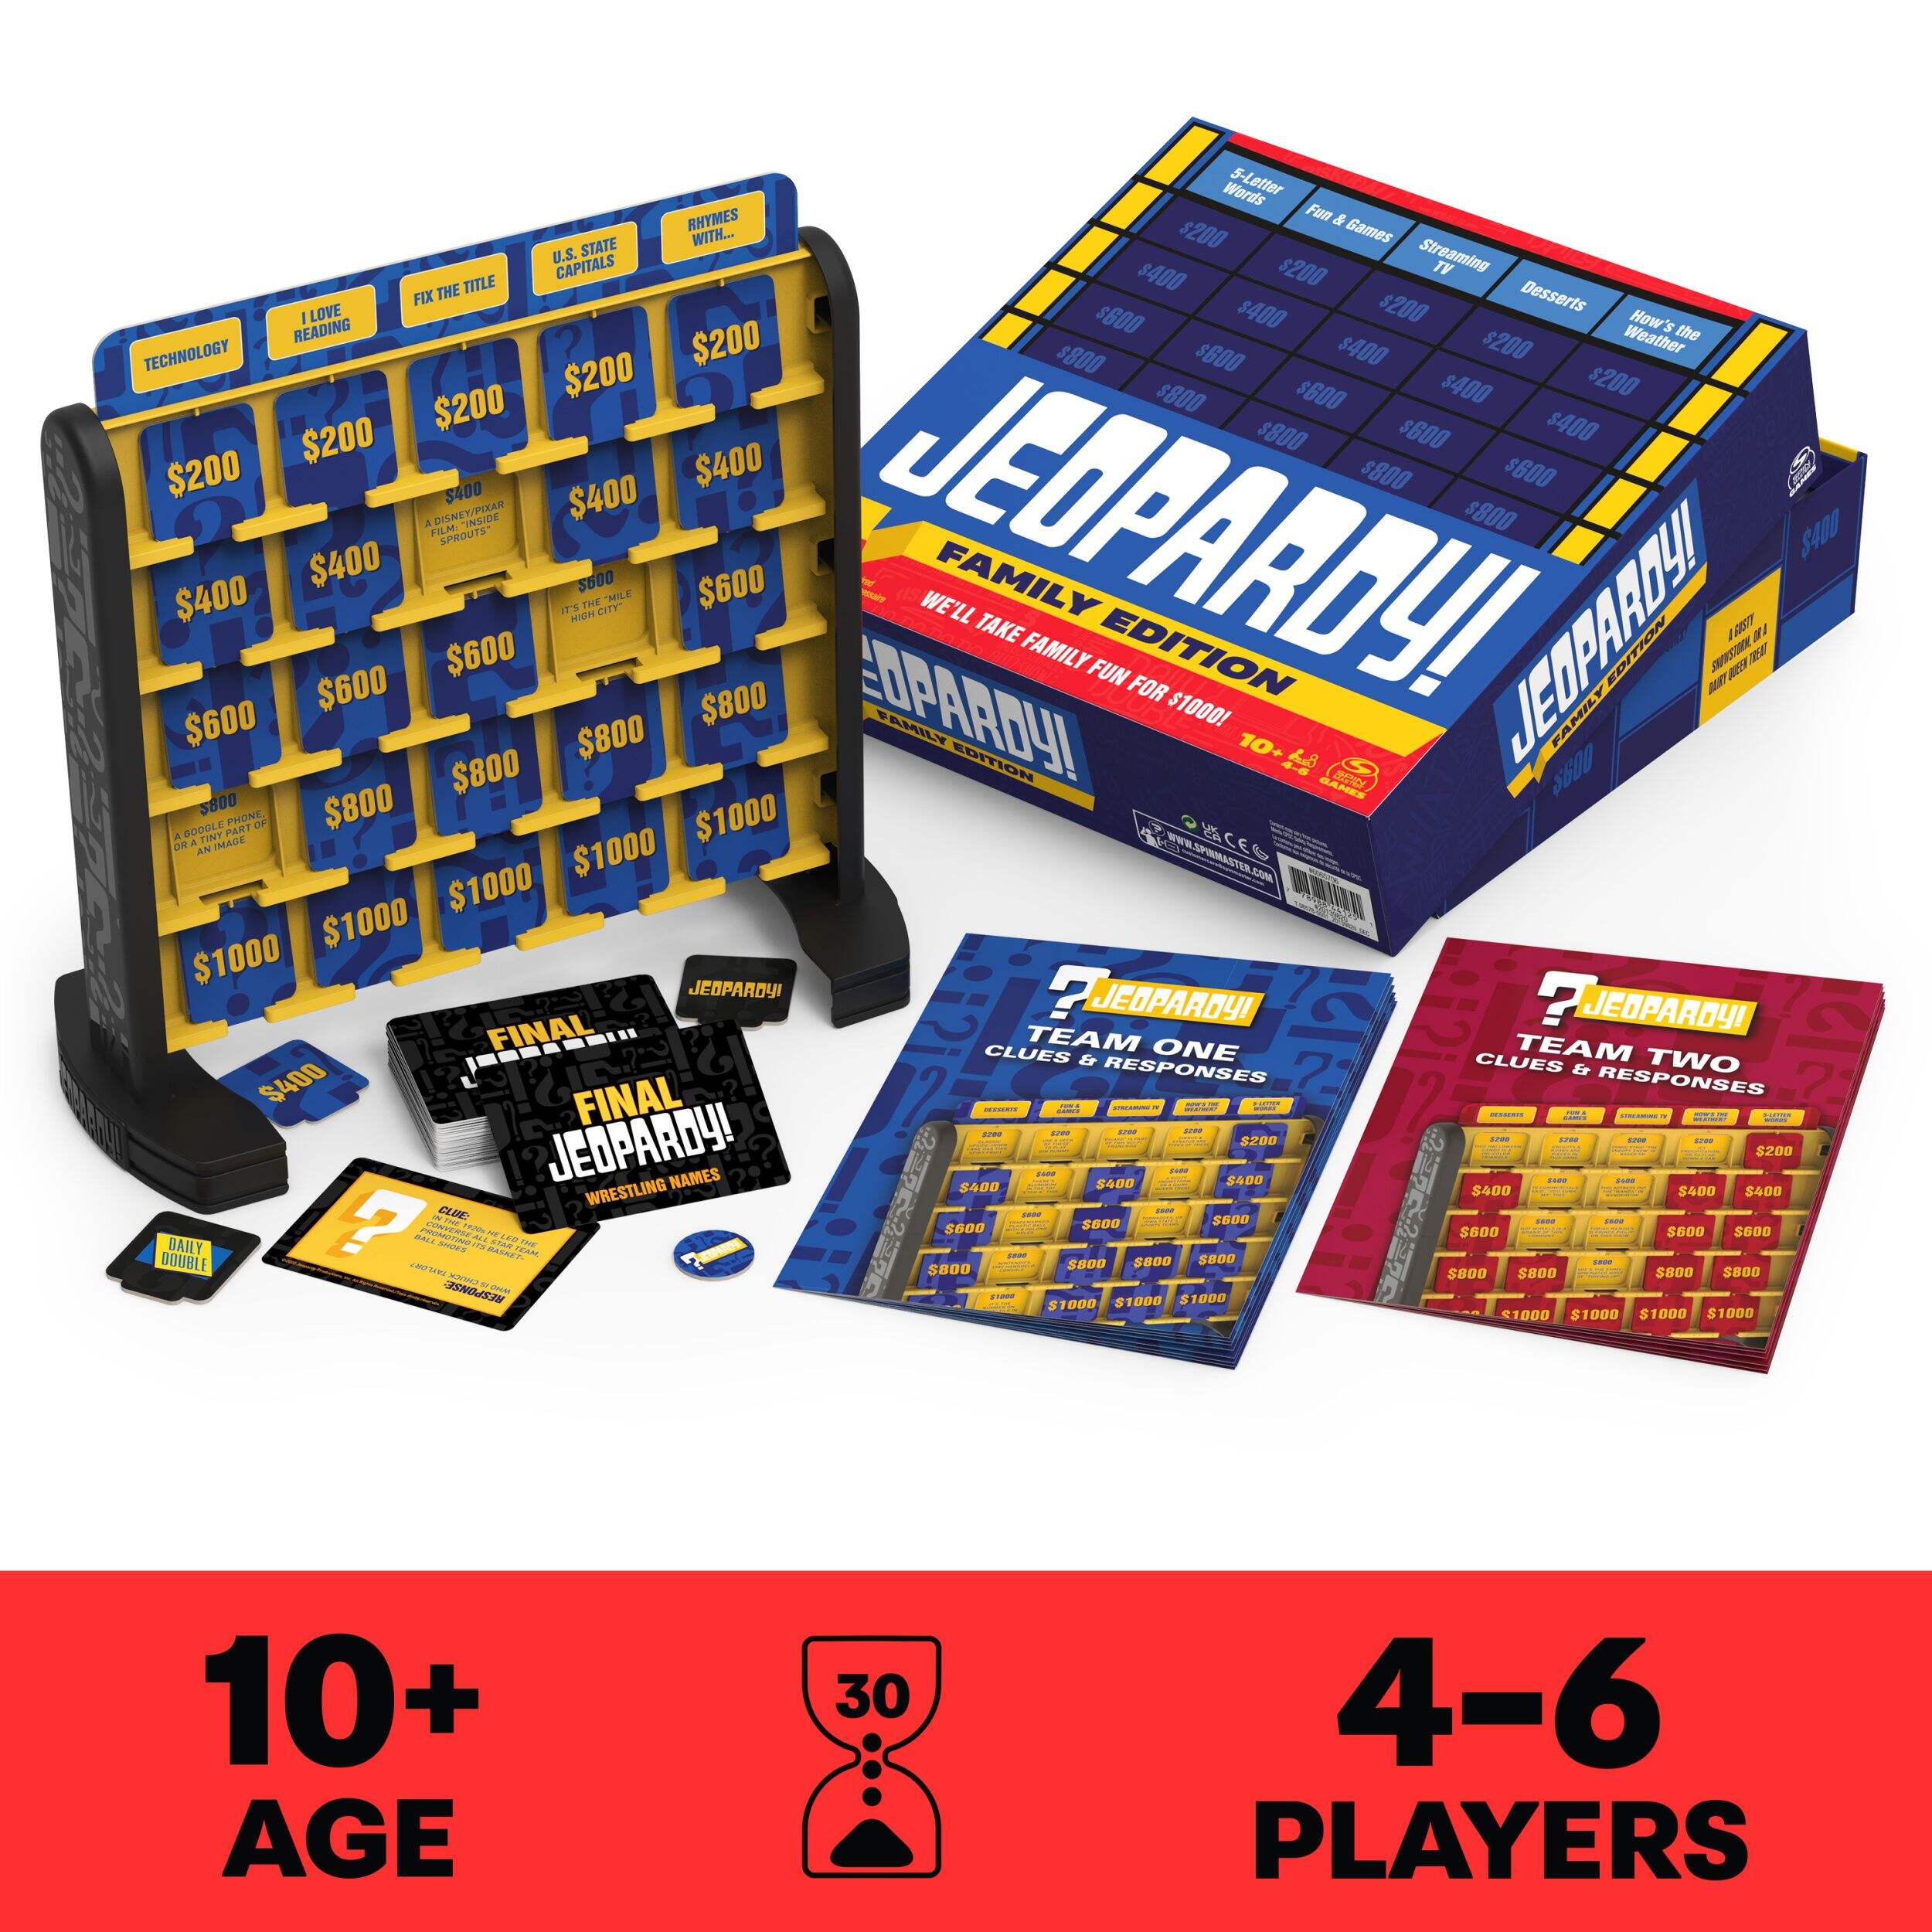 Jeopardy Family-Edition Trivia Board Game, Ages 10+ | Canadian Tire